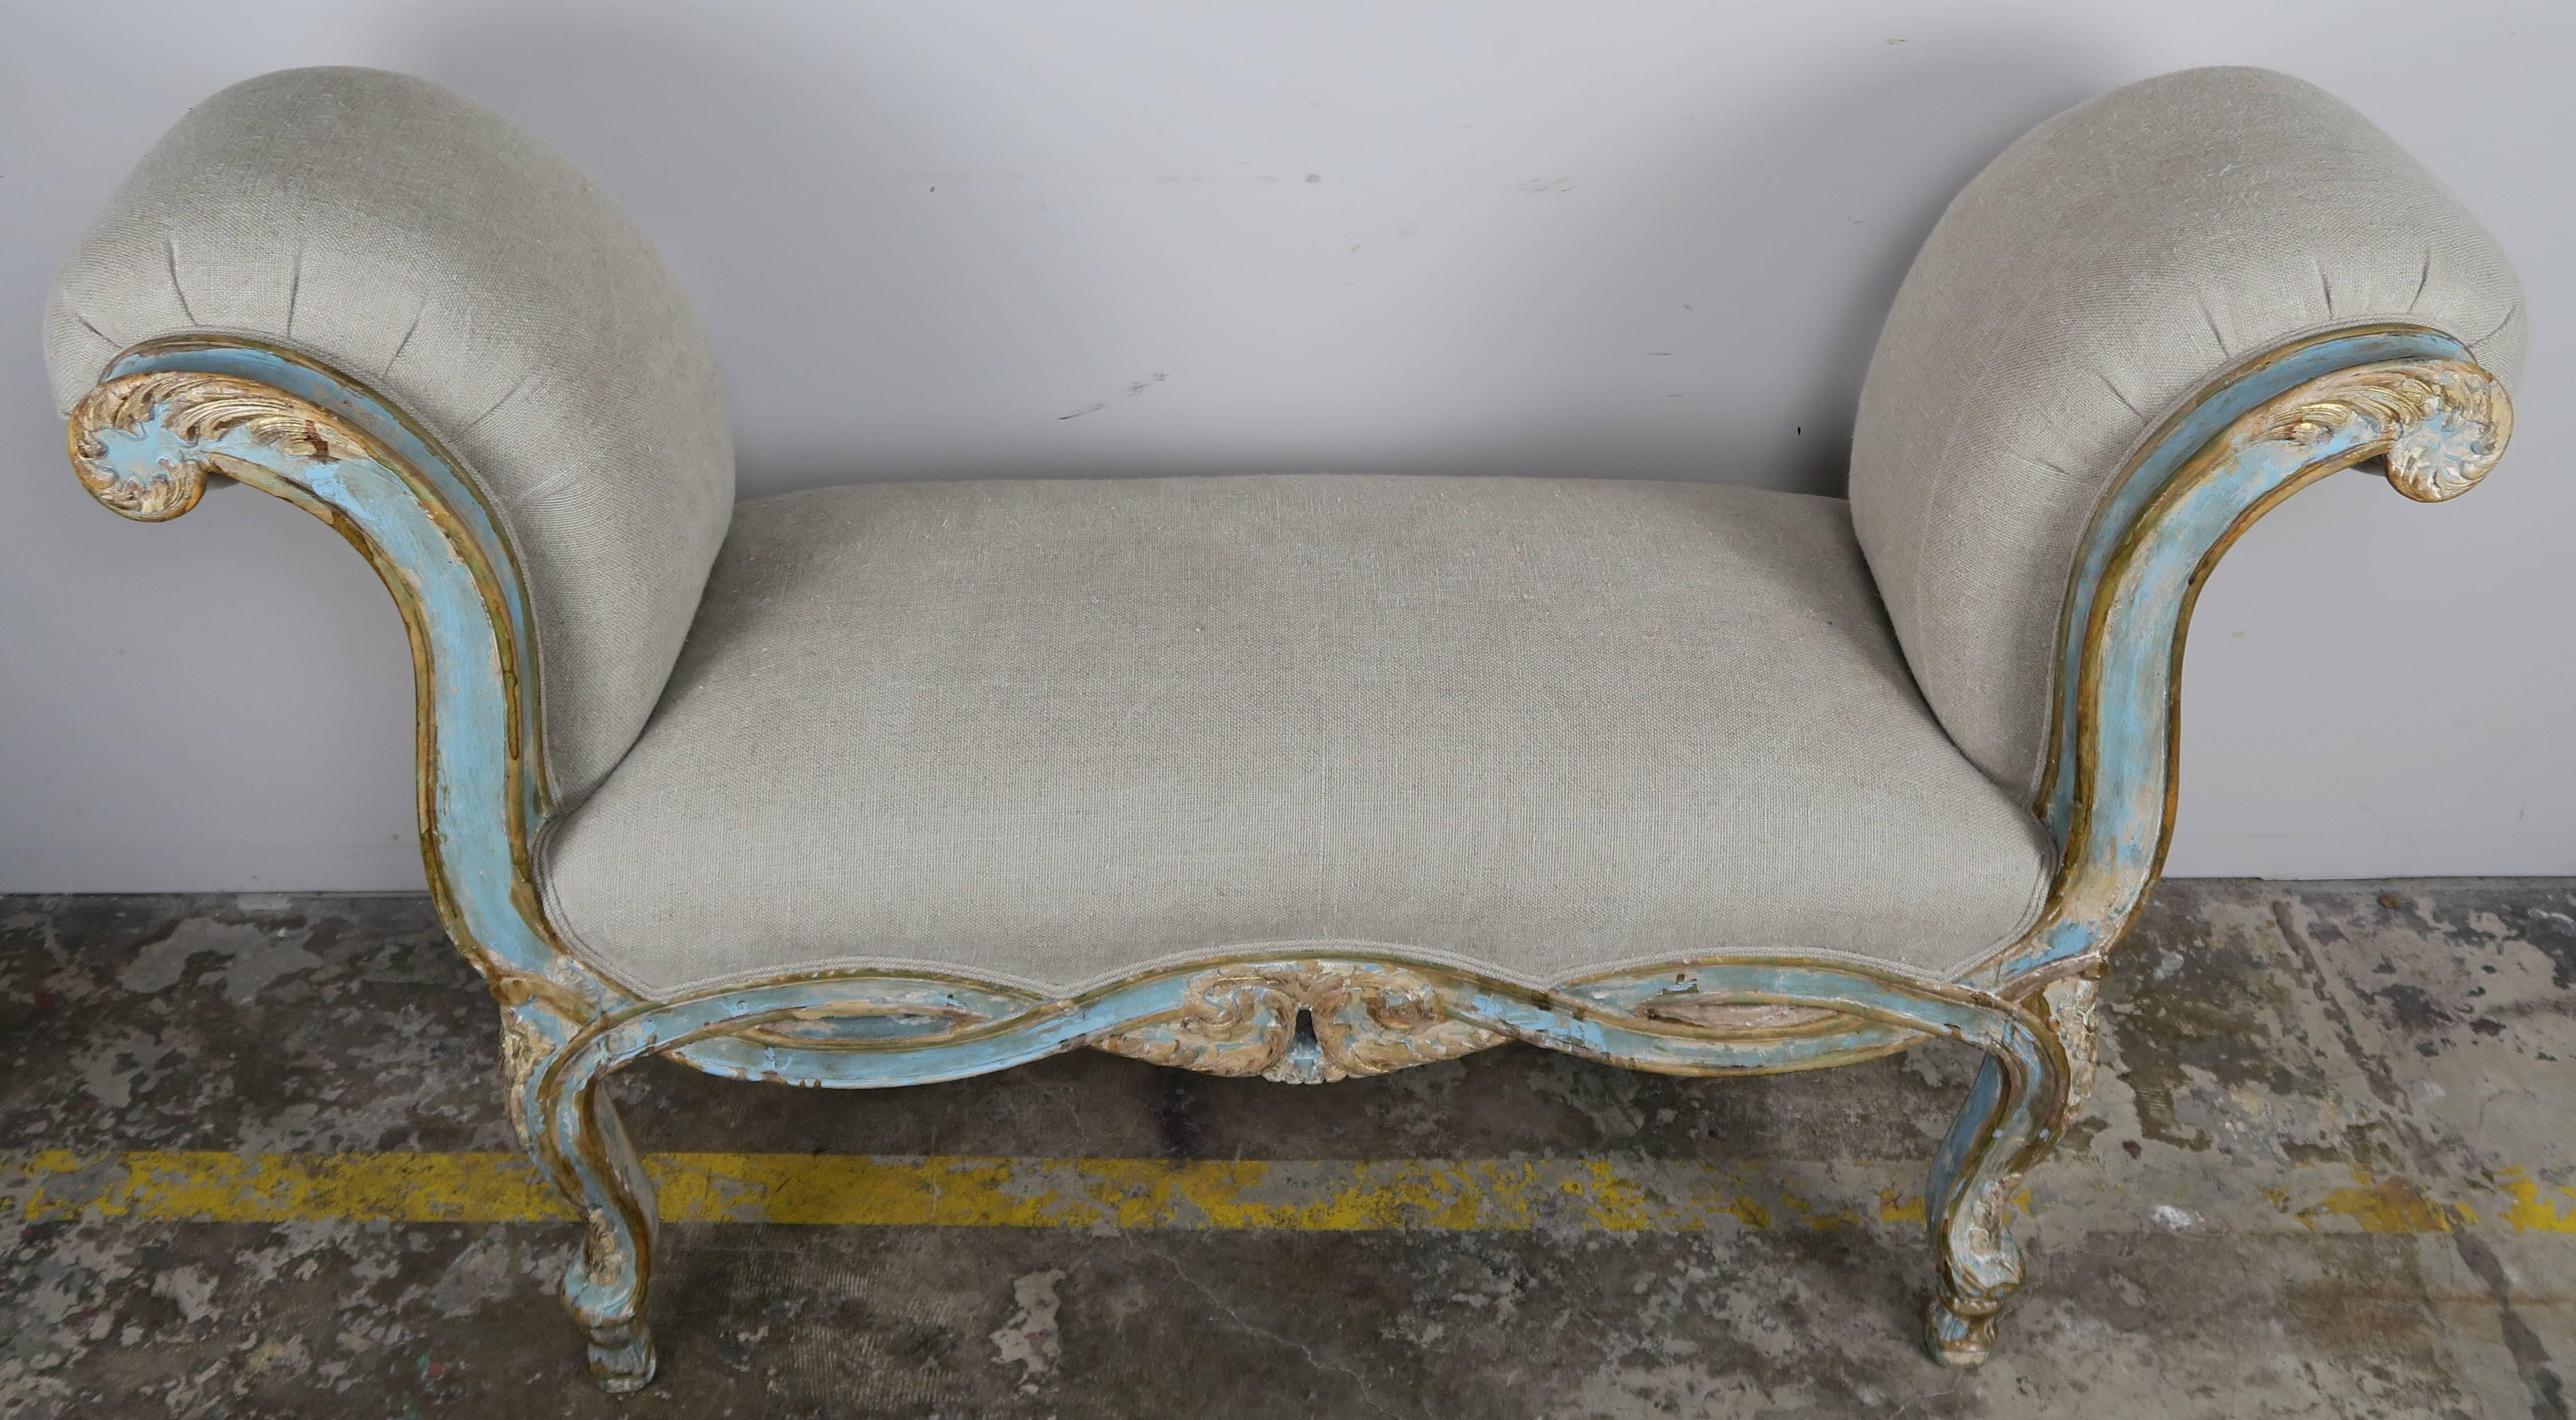 Pair of French Rococo style aqua and gold painted carved benches with rolled arms, cabriole legs, and braided apron. The benches are newly upholstered in a washed Belgium linen with double self cord detail.